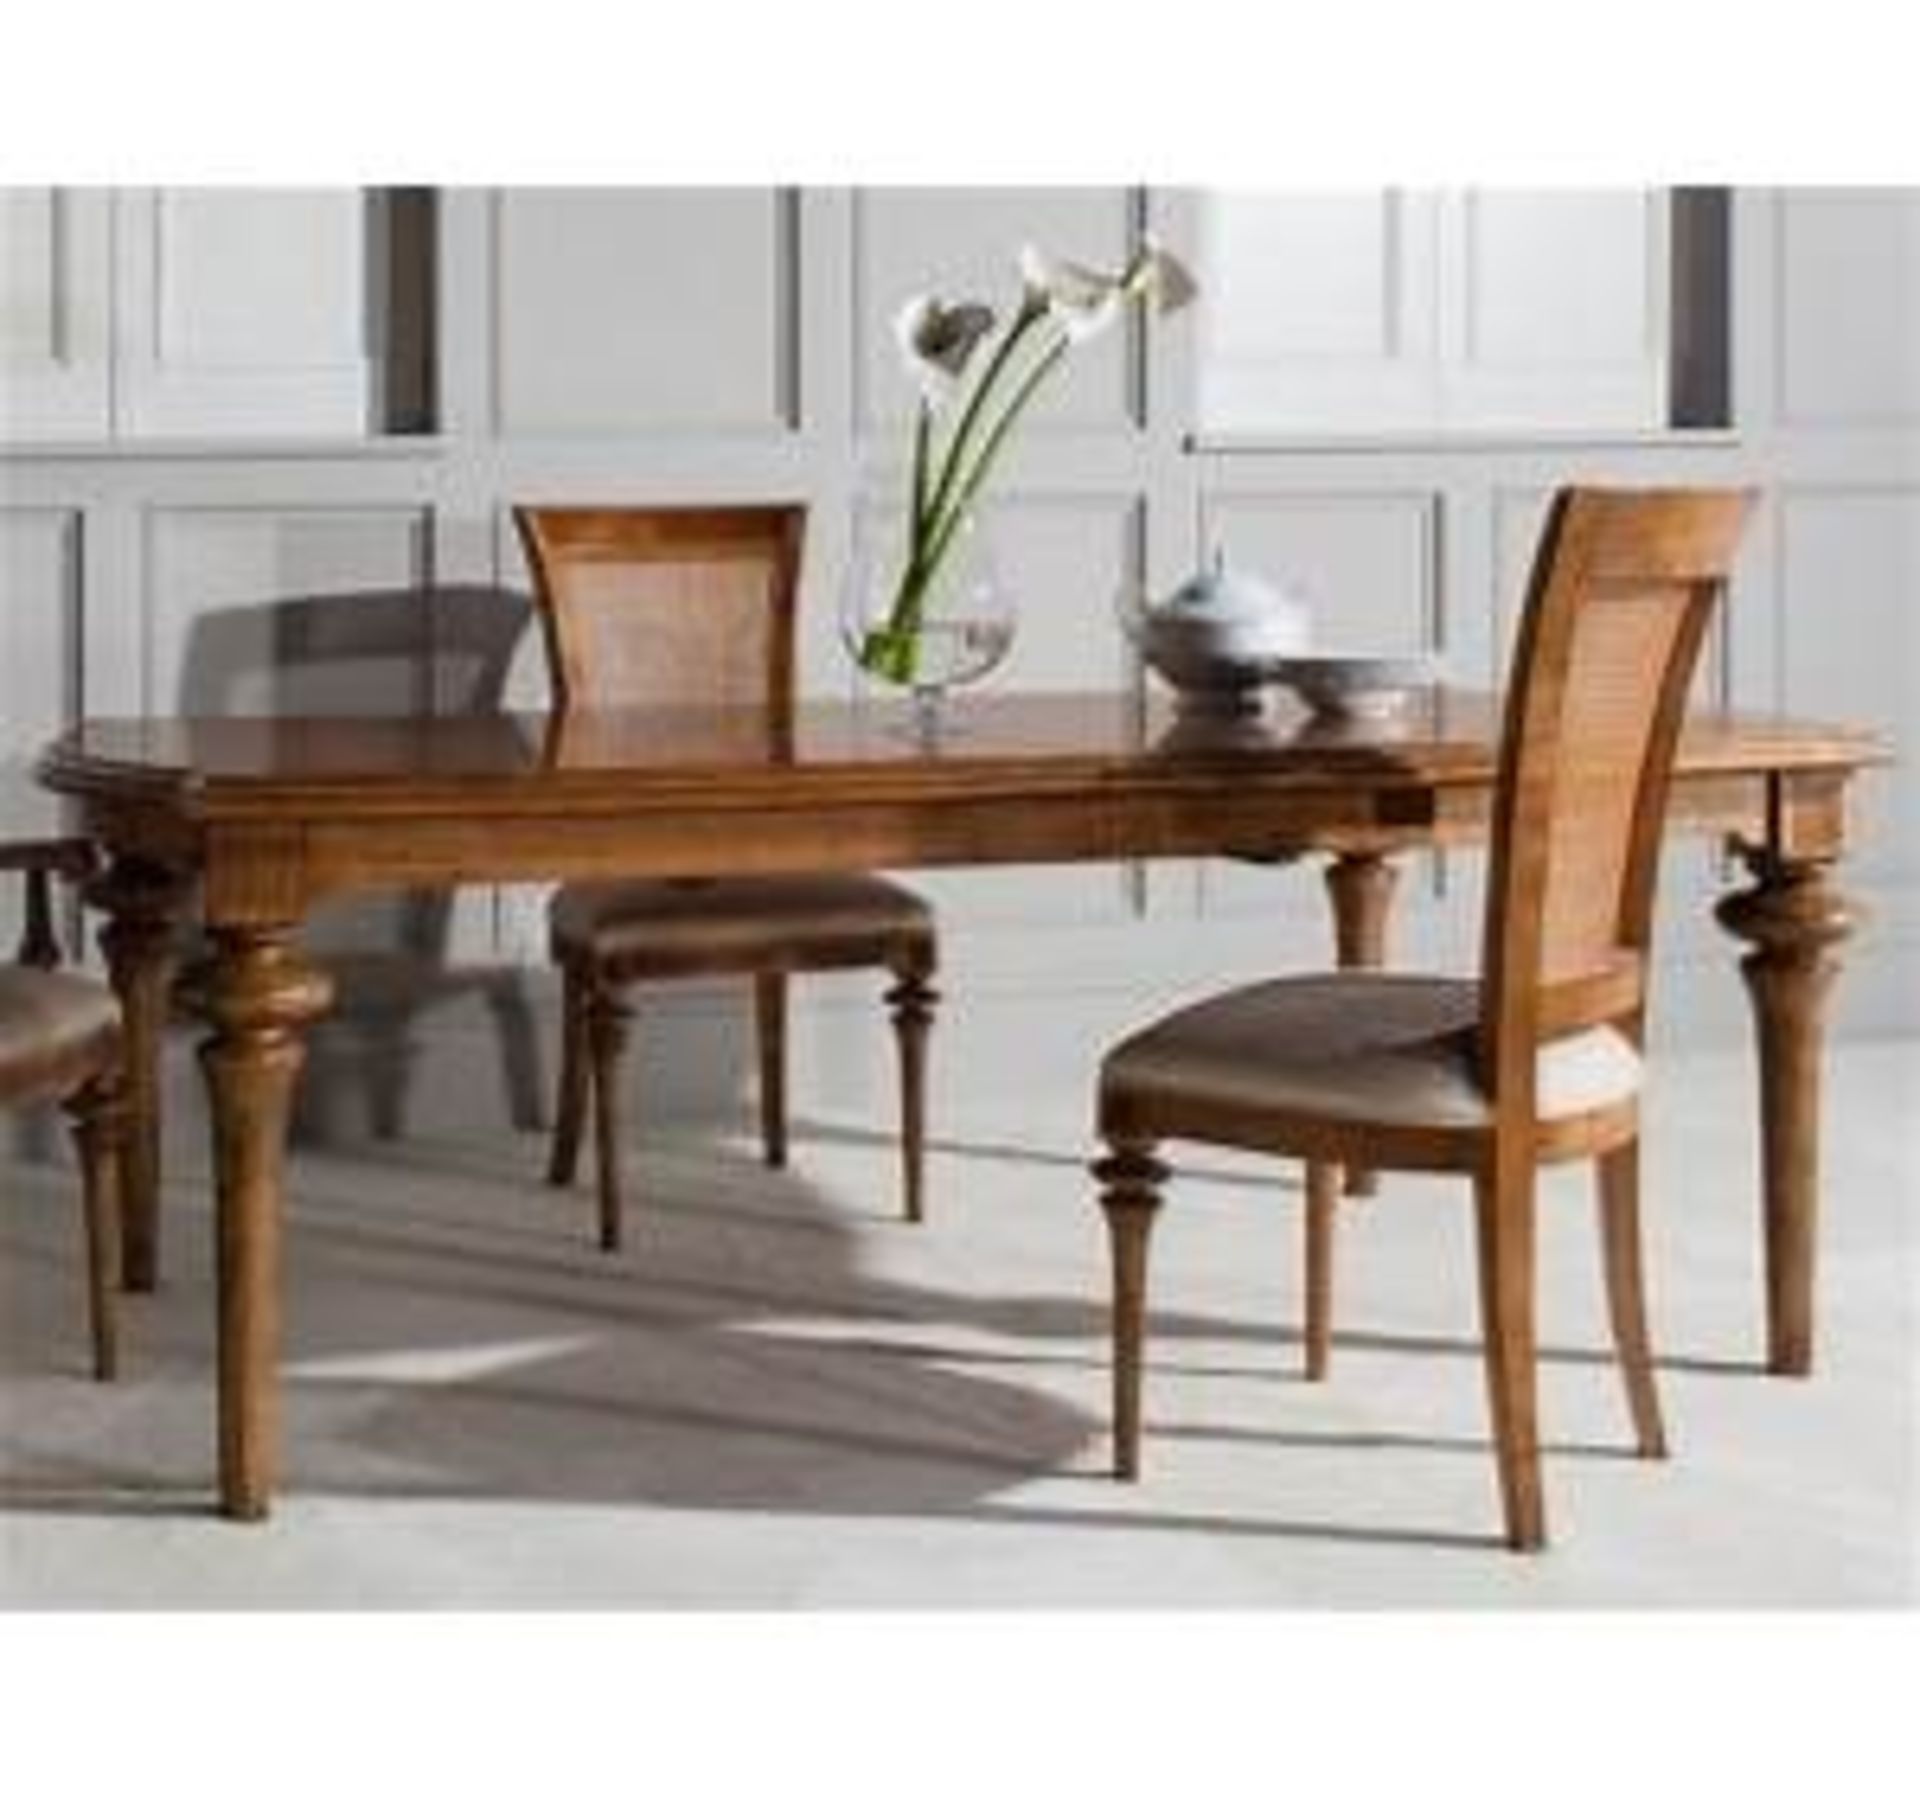 Spire Dining Large Extending Table Blonde European Walnut With Intricate Inlays Antiqued Hand Wax